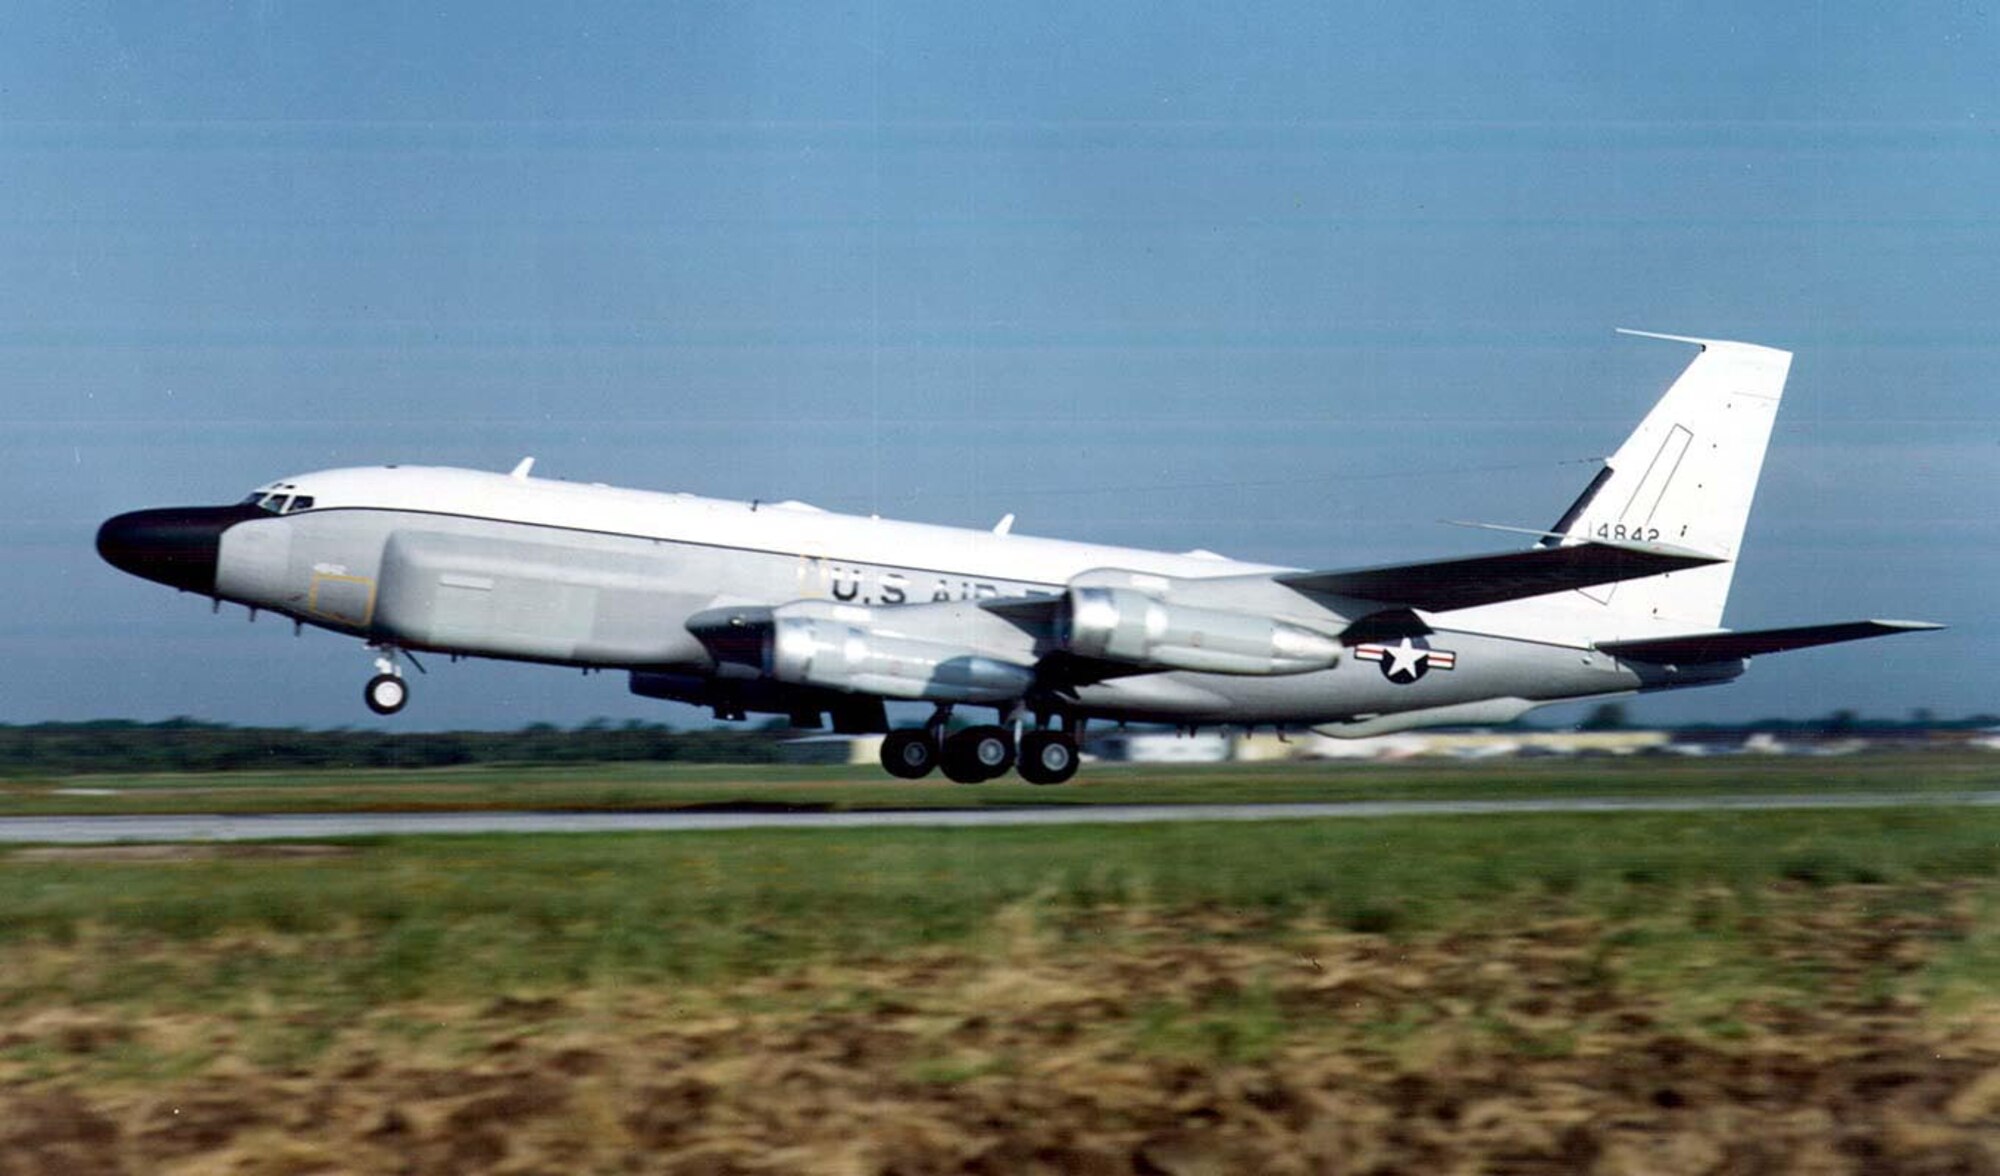 FILE PHOTO -- The hog-nosed RC-135 reconnaissance aircraft, with its extensive antennae array, provides vital real-time battle management information to mission planners, commanders and warfighters. The aircraft is a high-altitude version of the C-135, which is a militarized version of the Boeing 707. The Rivet Joint aircraft, owned and operated by the 55th Wing, Offutt Air Force Base, Neb., provides direct, near real-time reconnaissance information and electronic warfare support to theater commanders and combat forces. The Rivet Joint crew consists of members of several 55th Wing squadrons. (U.S. Air Force photo) 